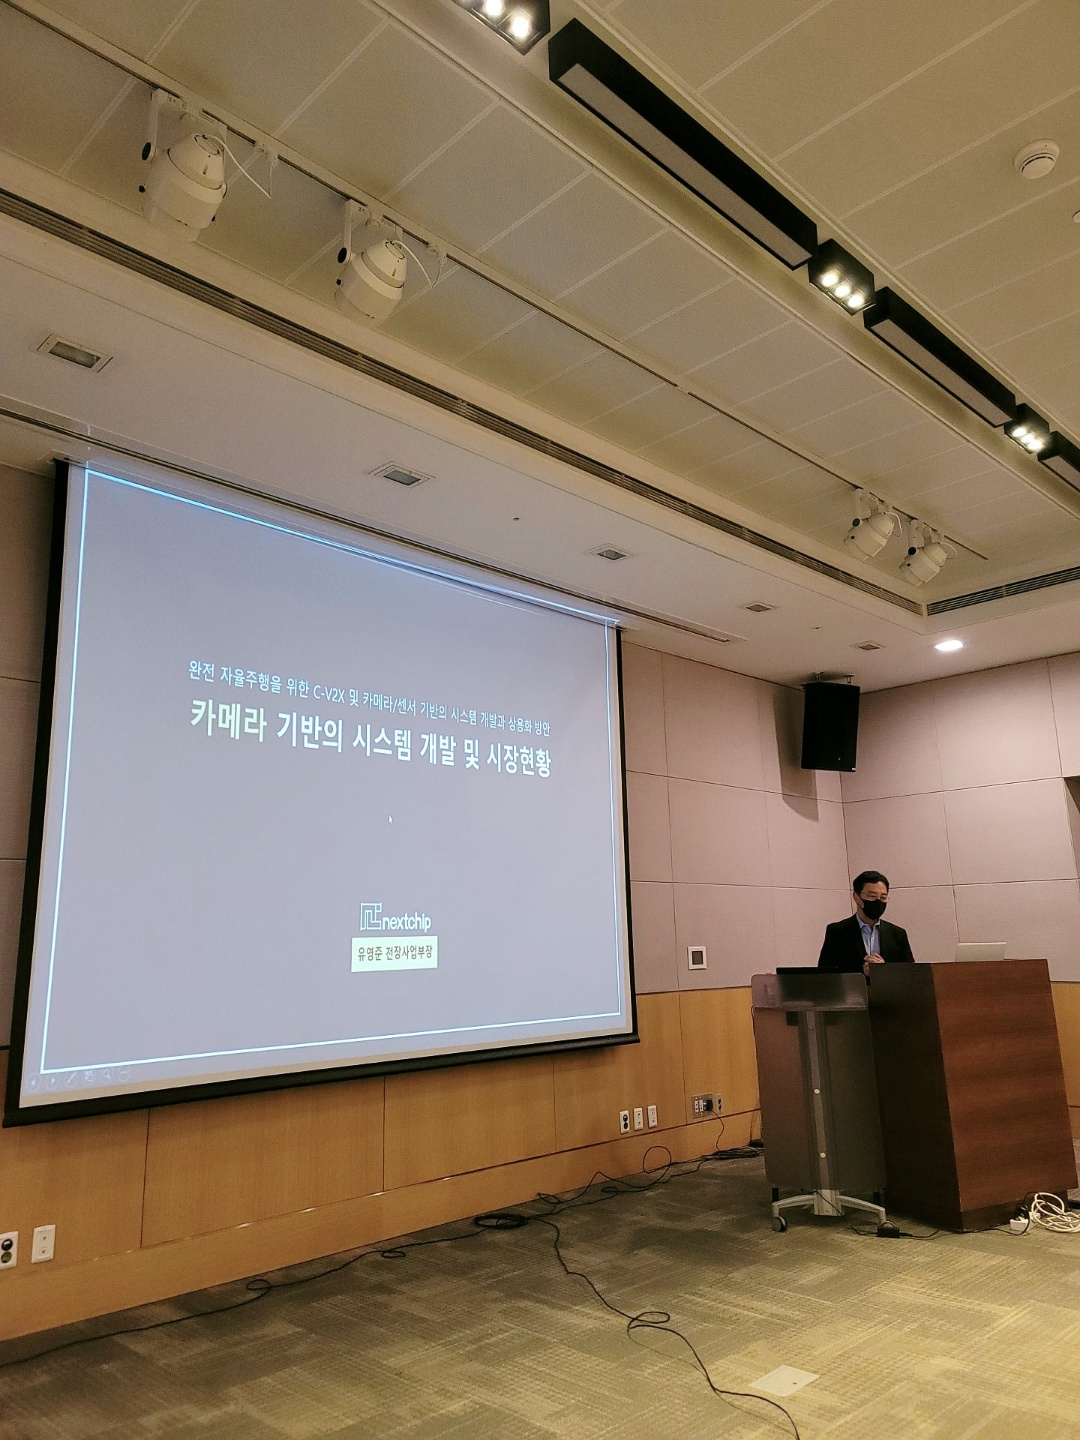 [Today's Speech by YOUNG JUN YOO, VP of Nextchip.]